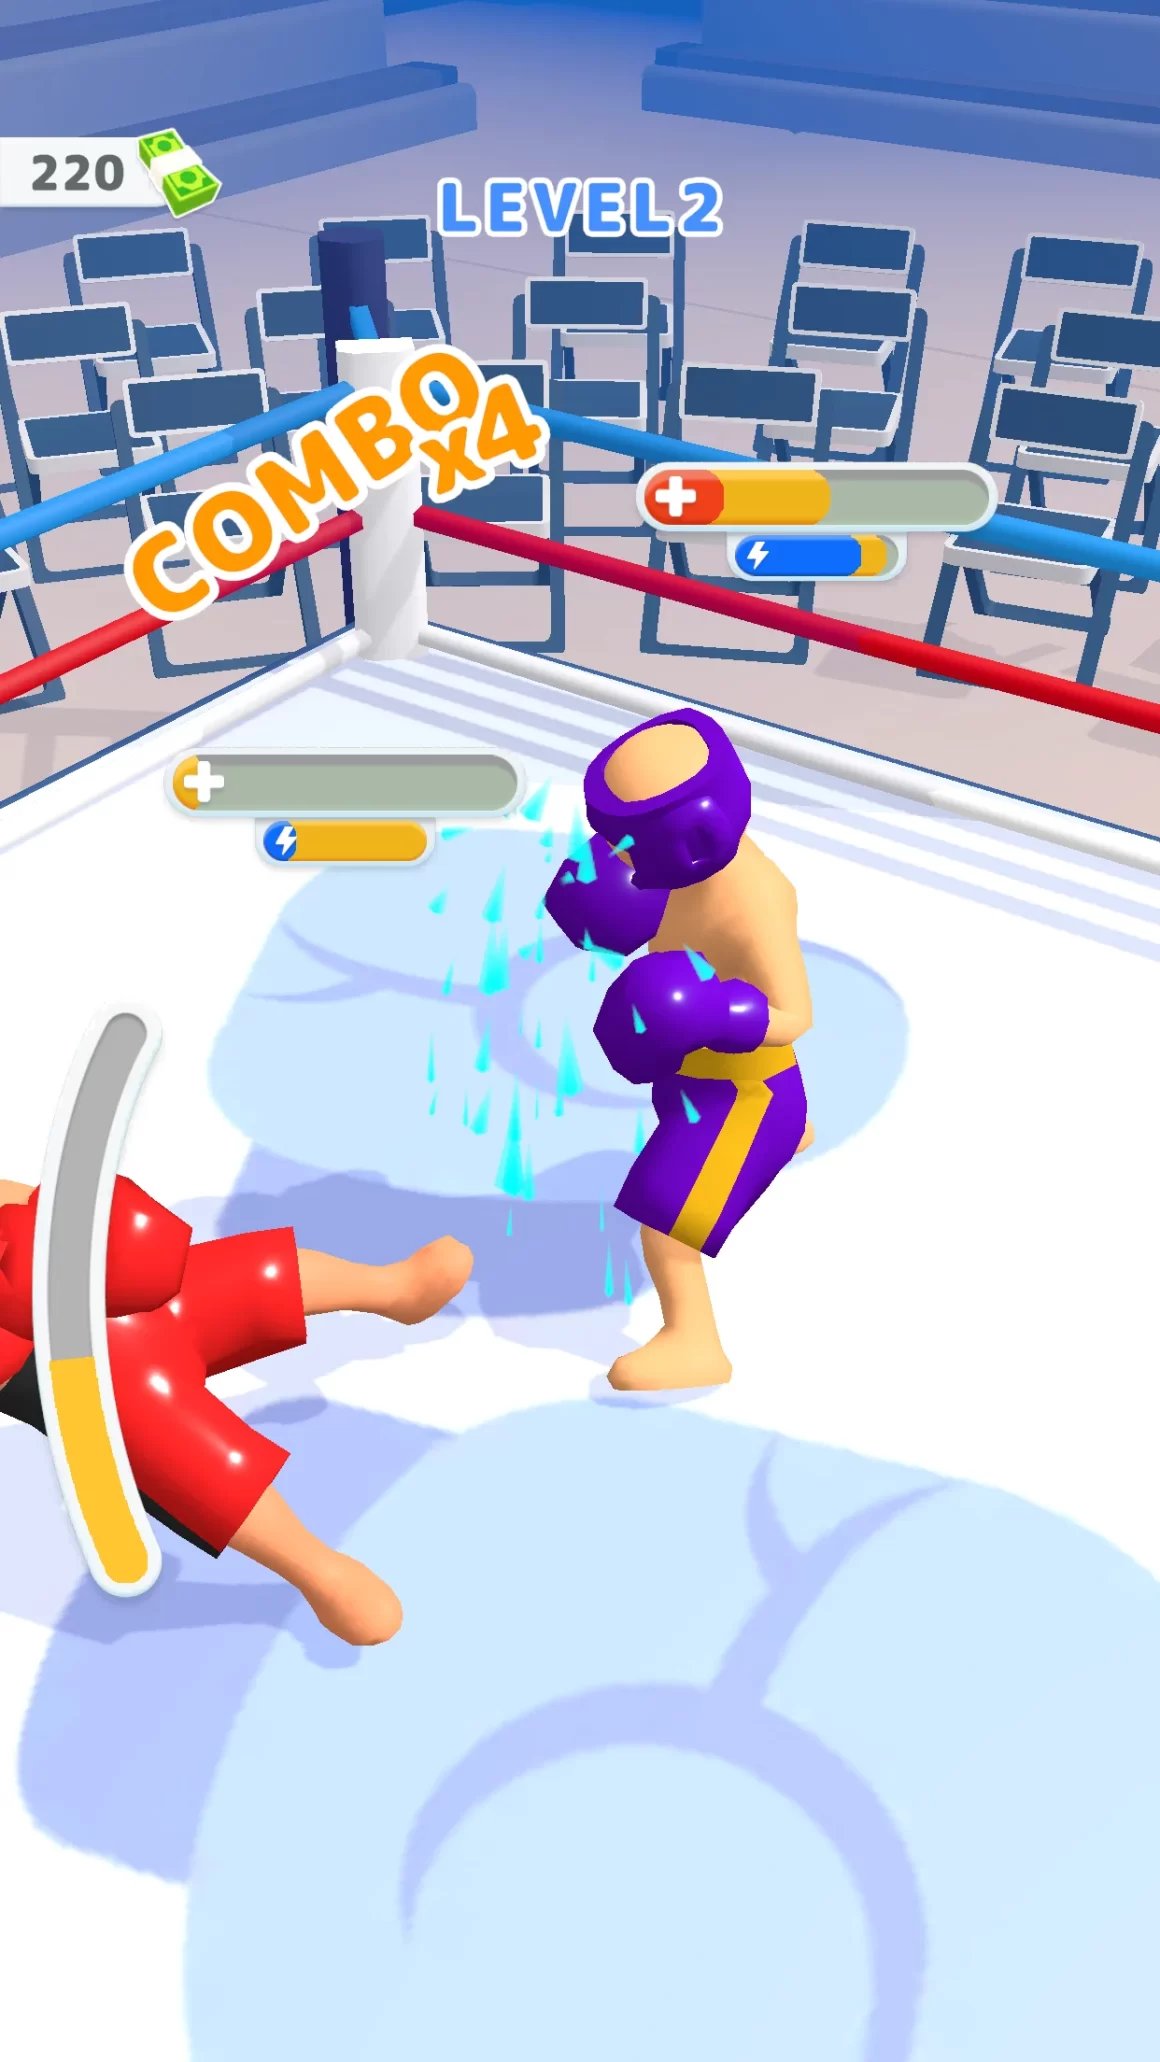 unnamed 4 6 1160x2062 - Punch Guys Mod Apk V2.6.5 (Unlimited Money) Latest Version